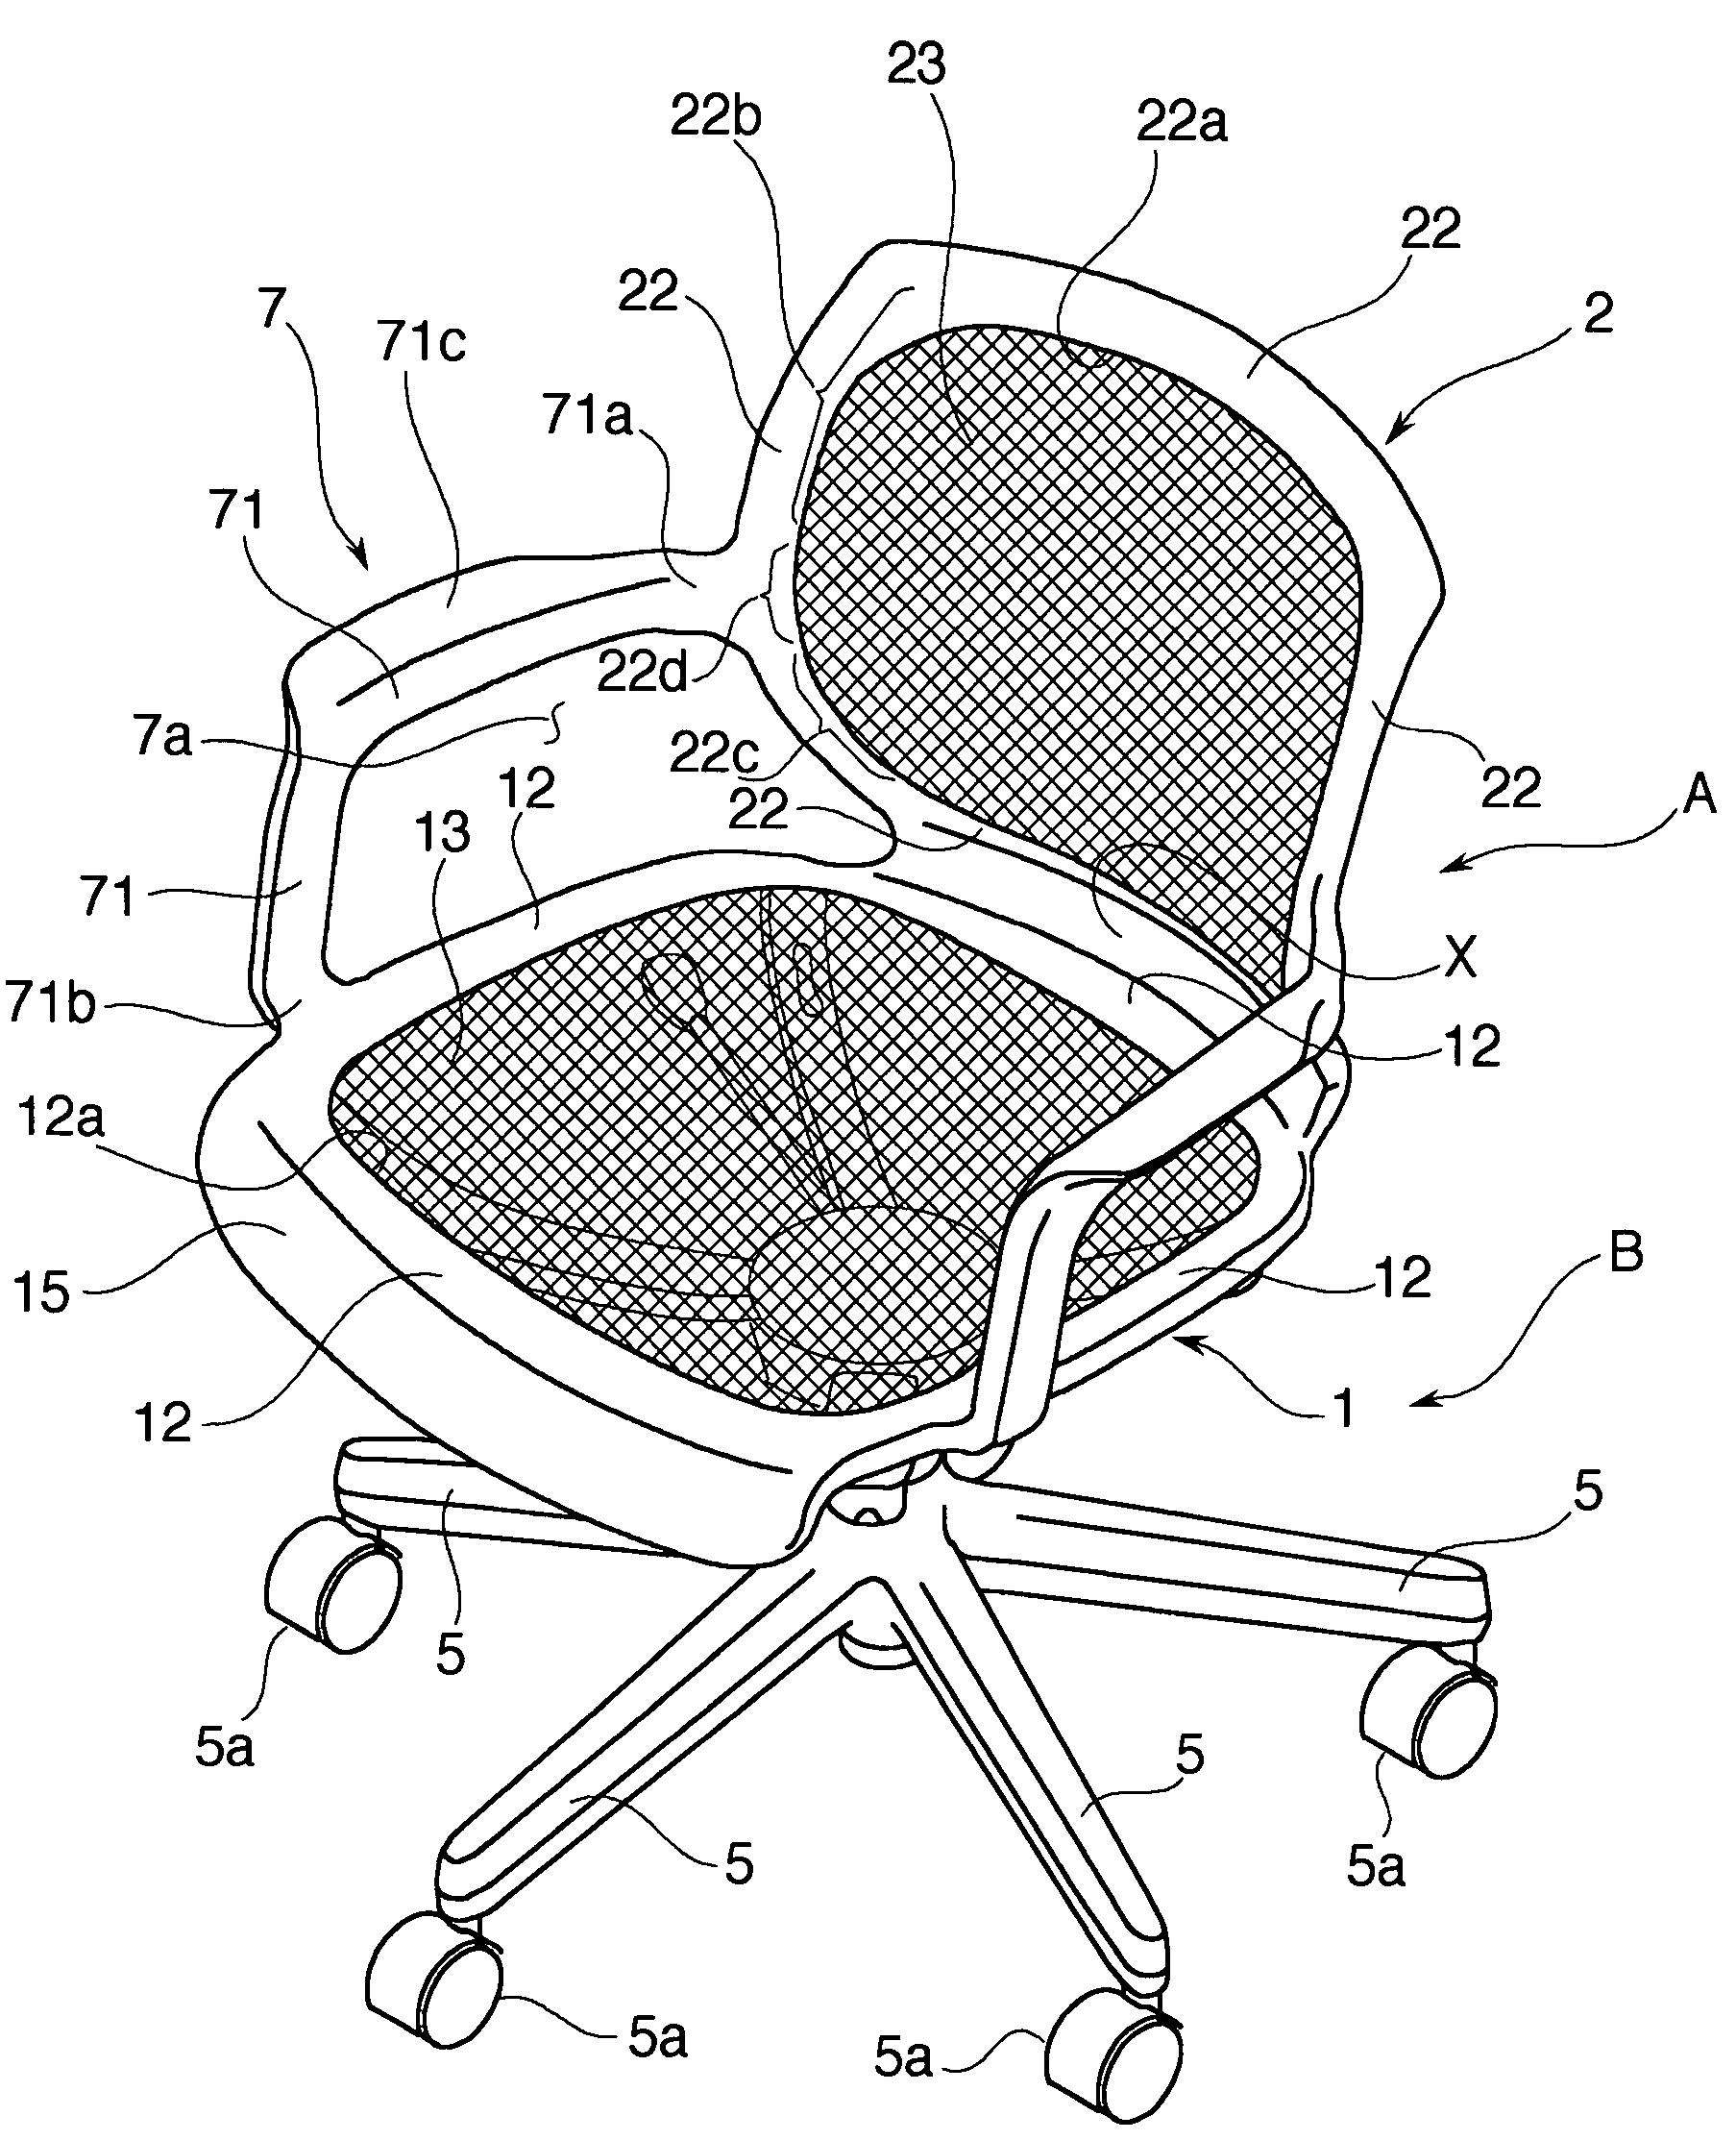 Chair having integrally formed back frame and seat frame